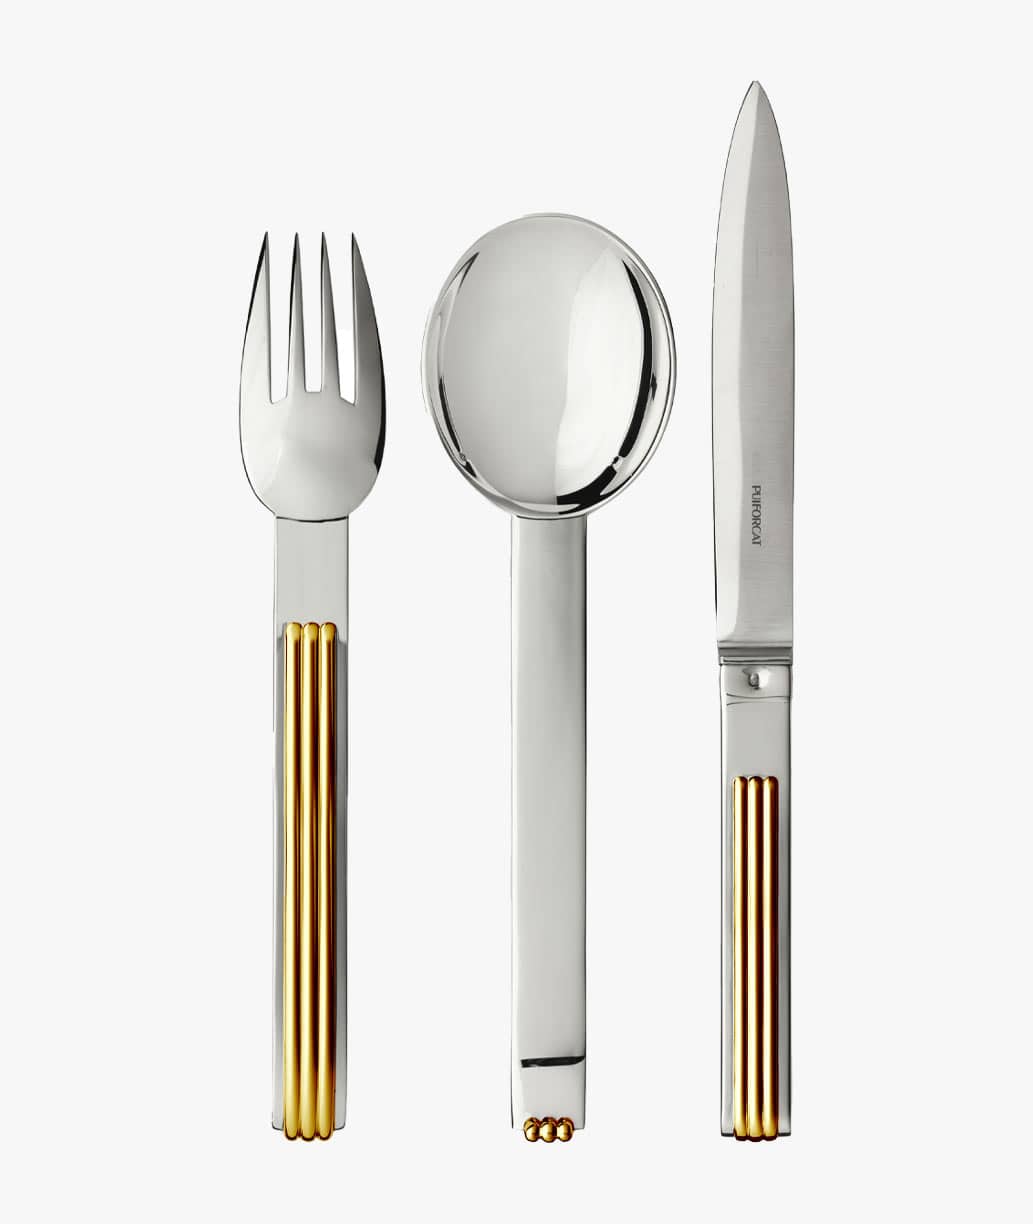 Pieces of cutlery from Deauville collection in sterling silver and gold-gilt finish